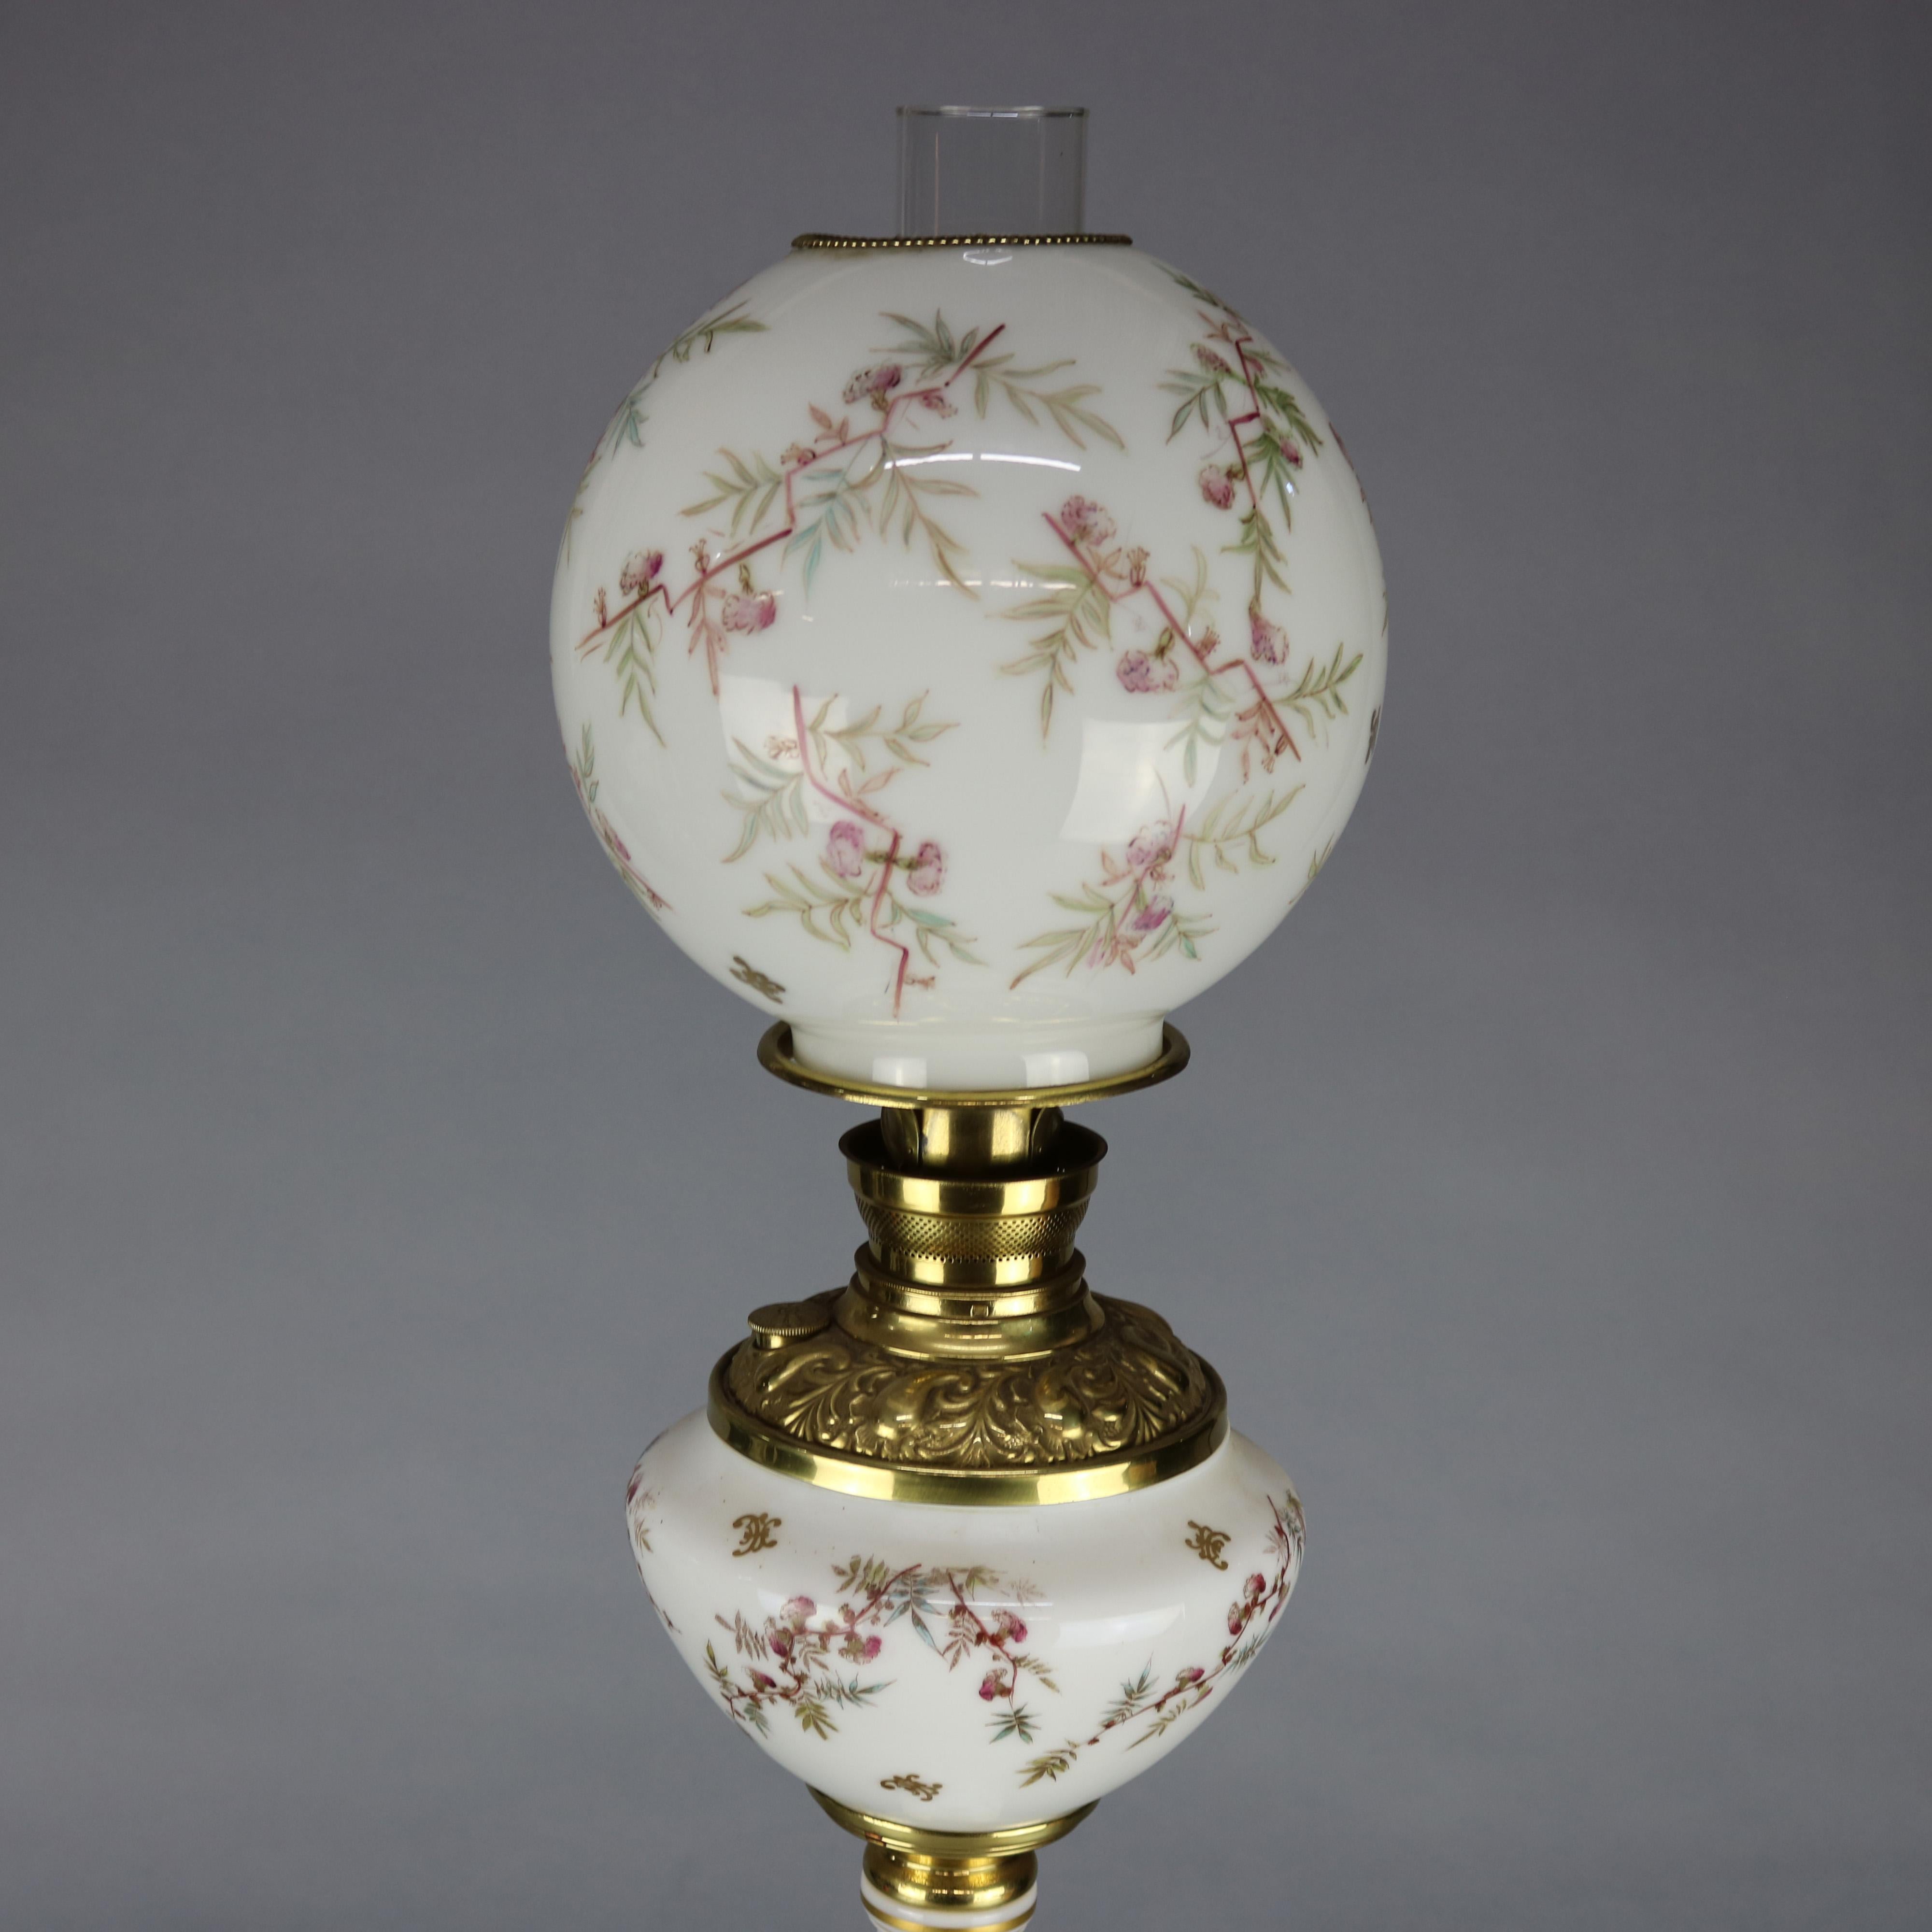 Hand-Painted Antique Hand Painted Gone with the Wind Parlor Lamp, circa 1890